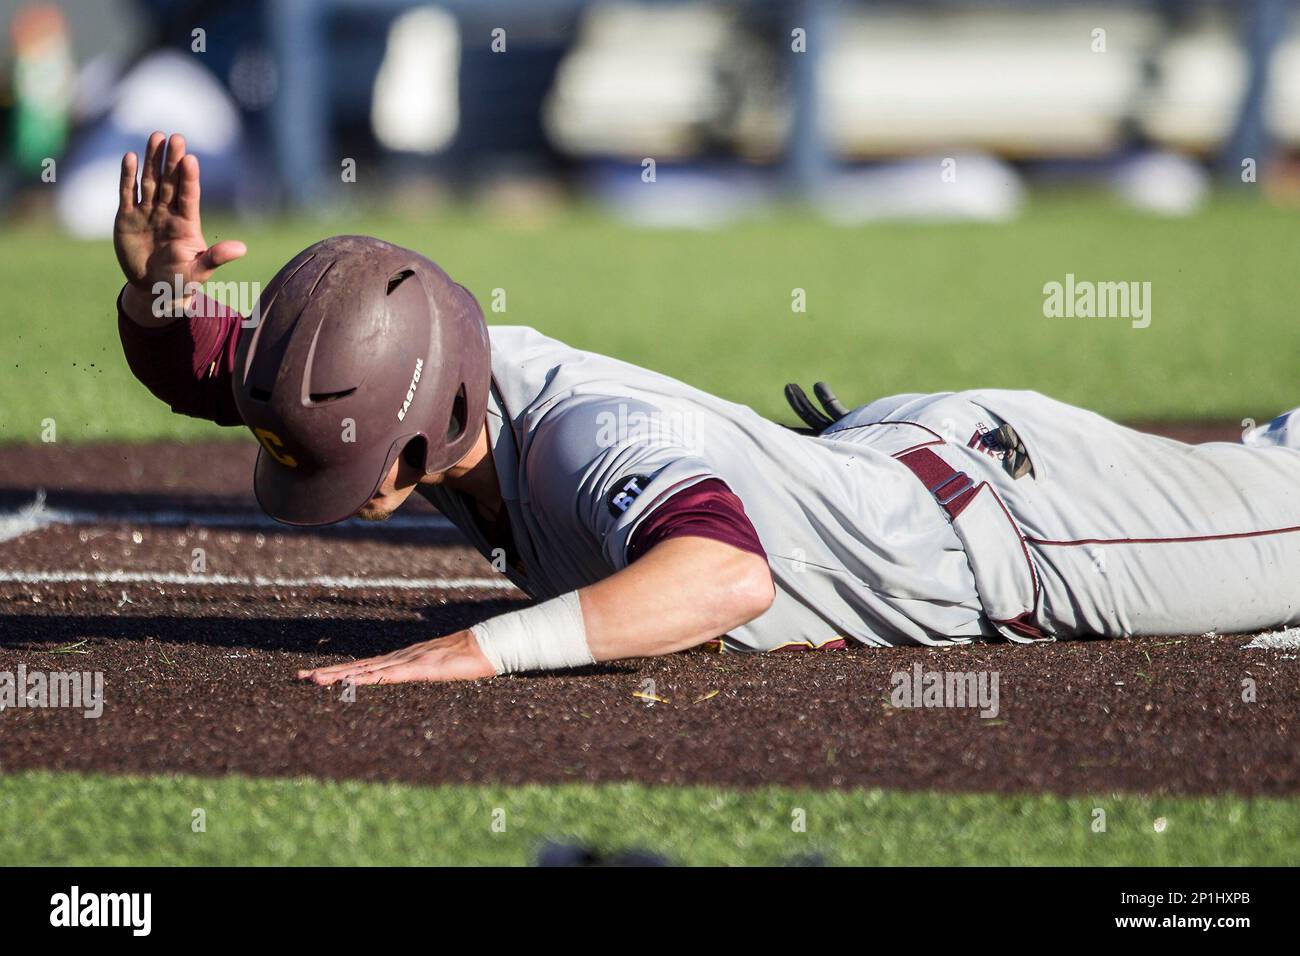 Central Michigan Chippewas shortstop Zach McKinstry (8) catches a